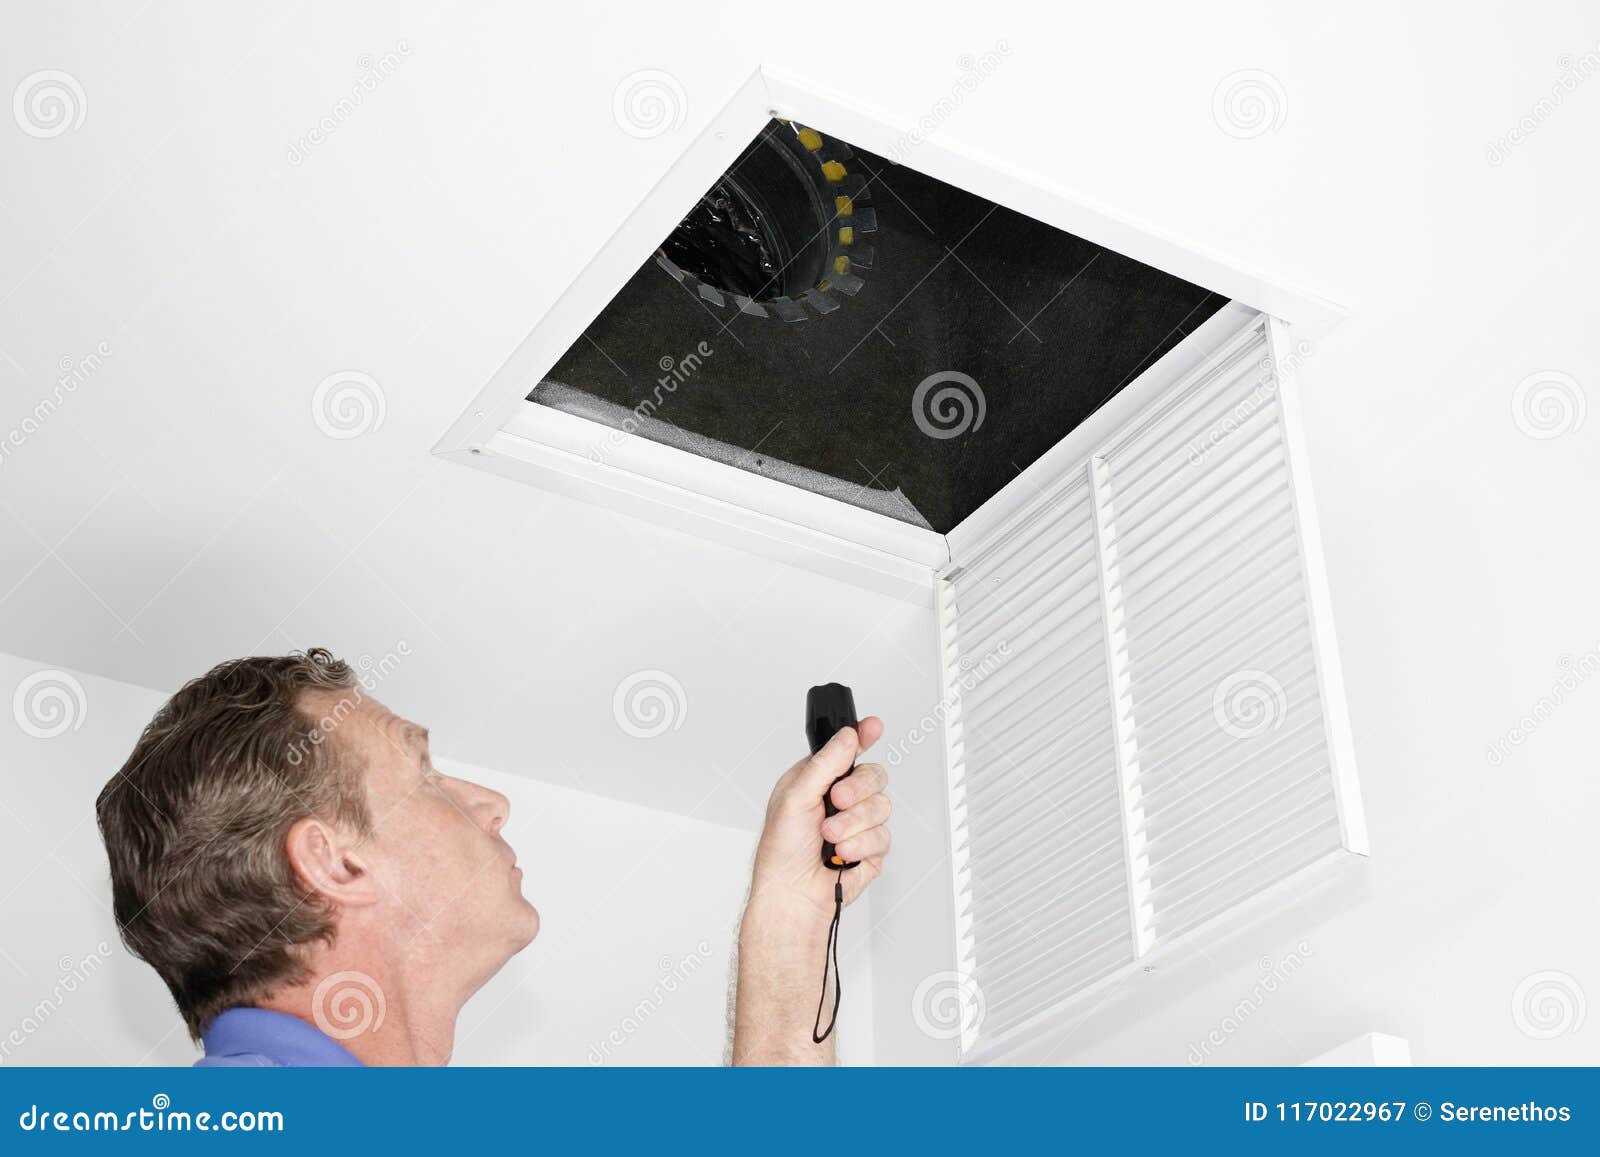 man inspecting air intake duct